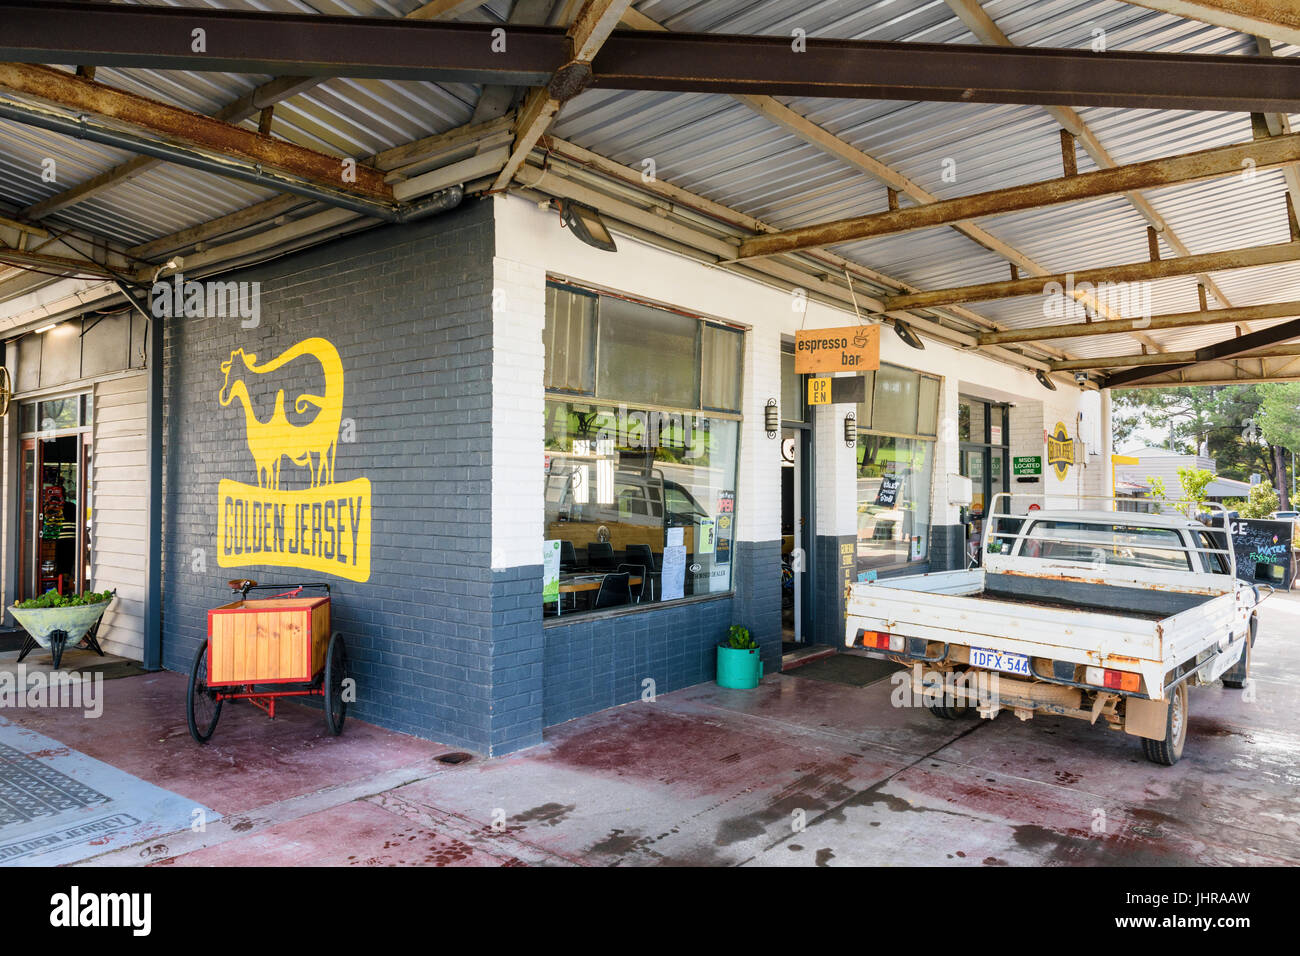 Golden Jersey garage petrol station coffee shop and general store in the country town of Cowaramup, Western Australia Stock Photo